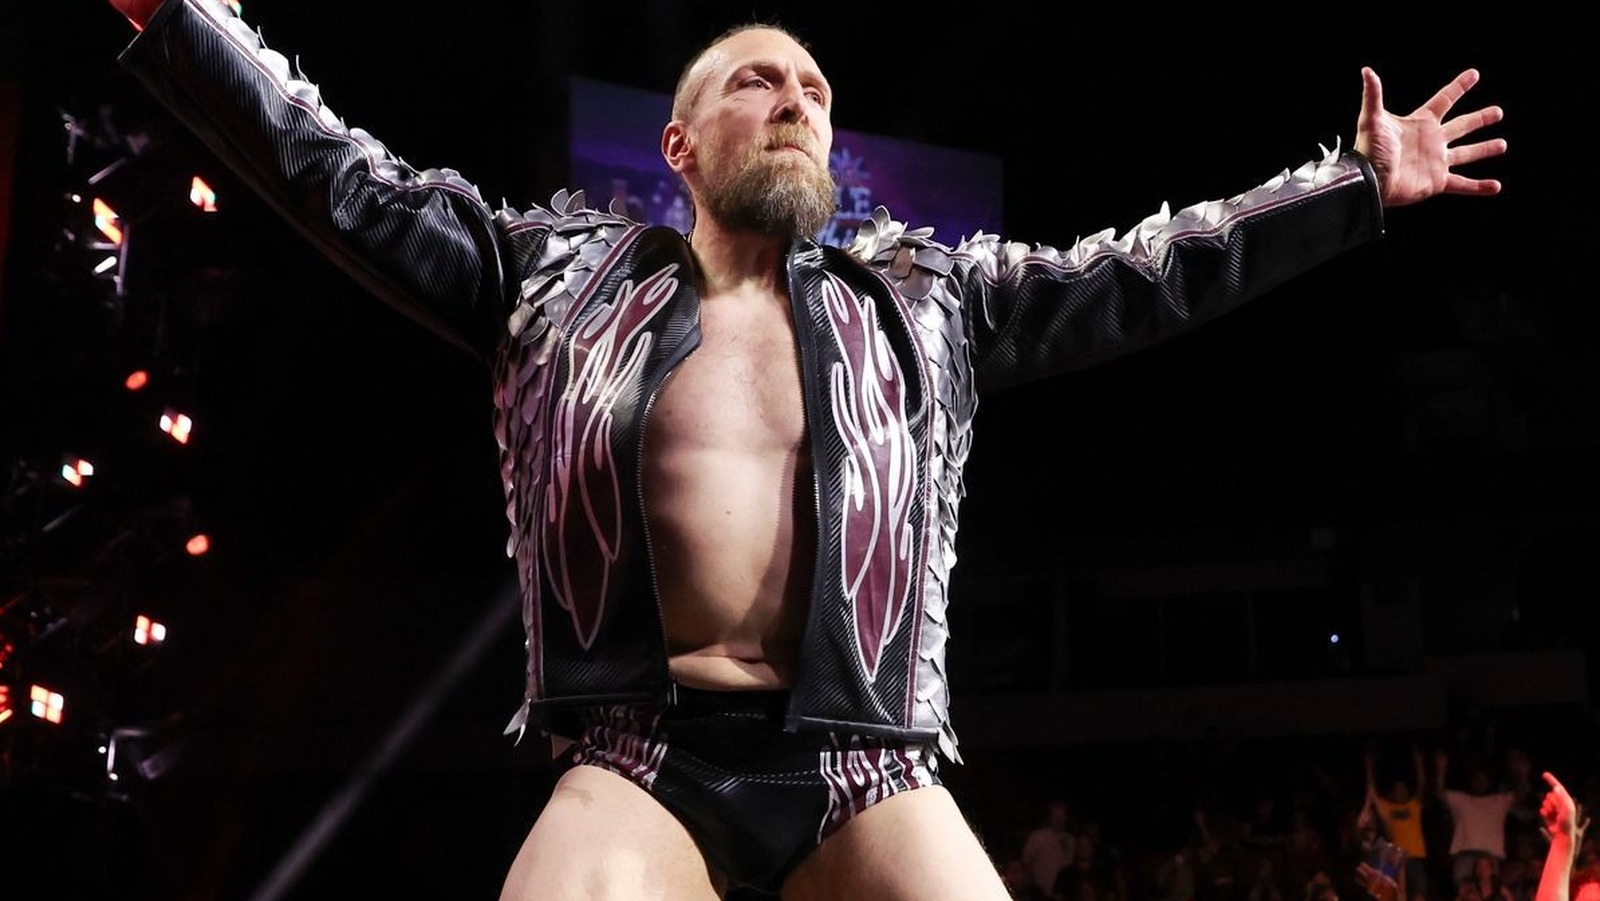 Bryan Danielson Explains Why He Doesn't Want To Be AEW World Champion